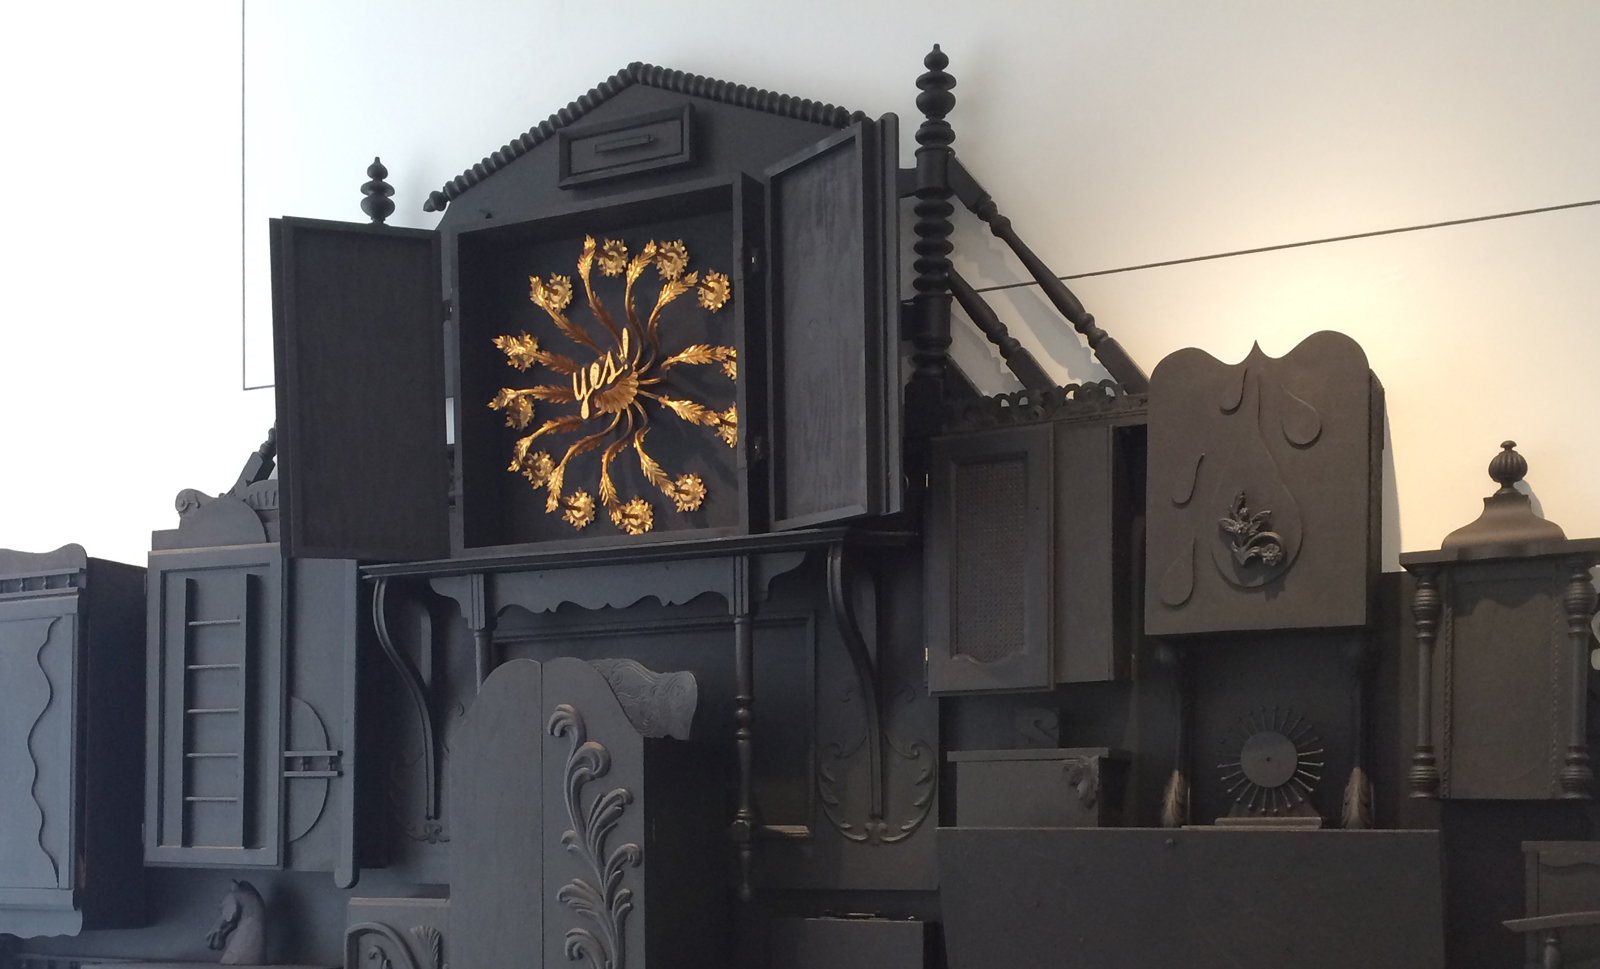 A collection of wood structures painted black. One is open to a collage of found objects. 